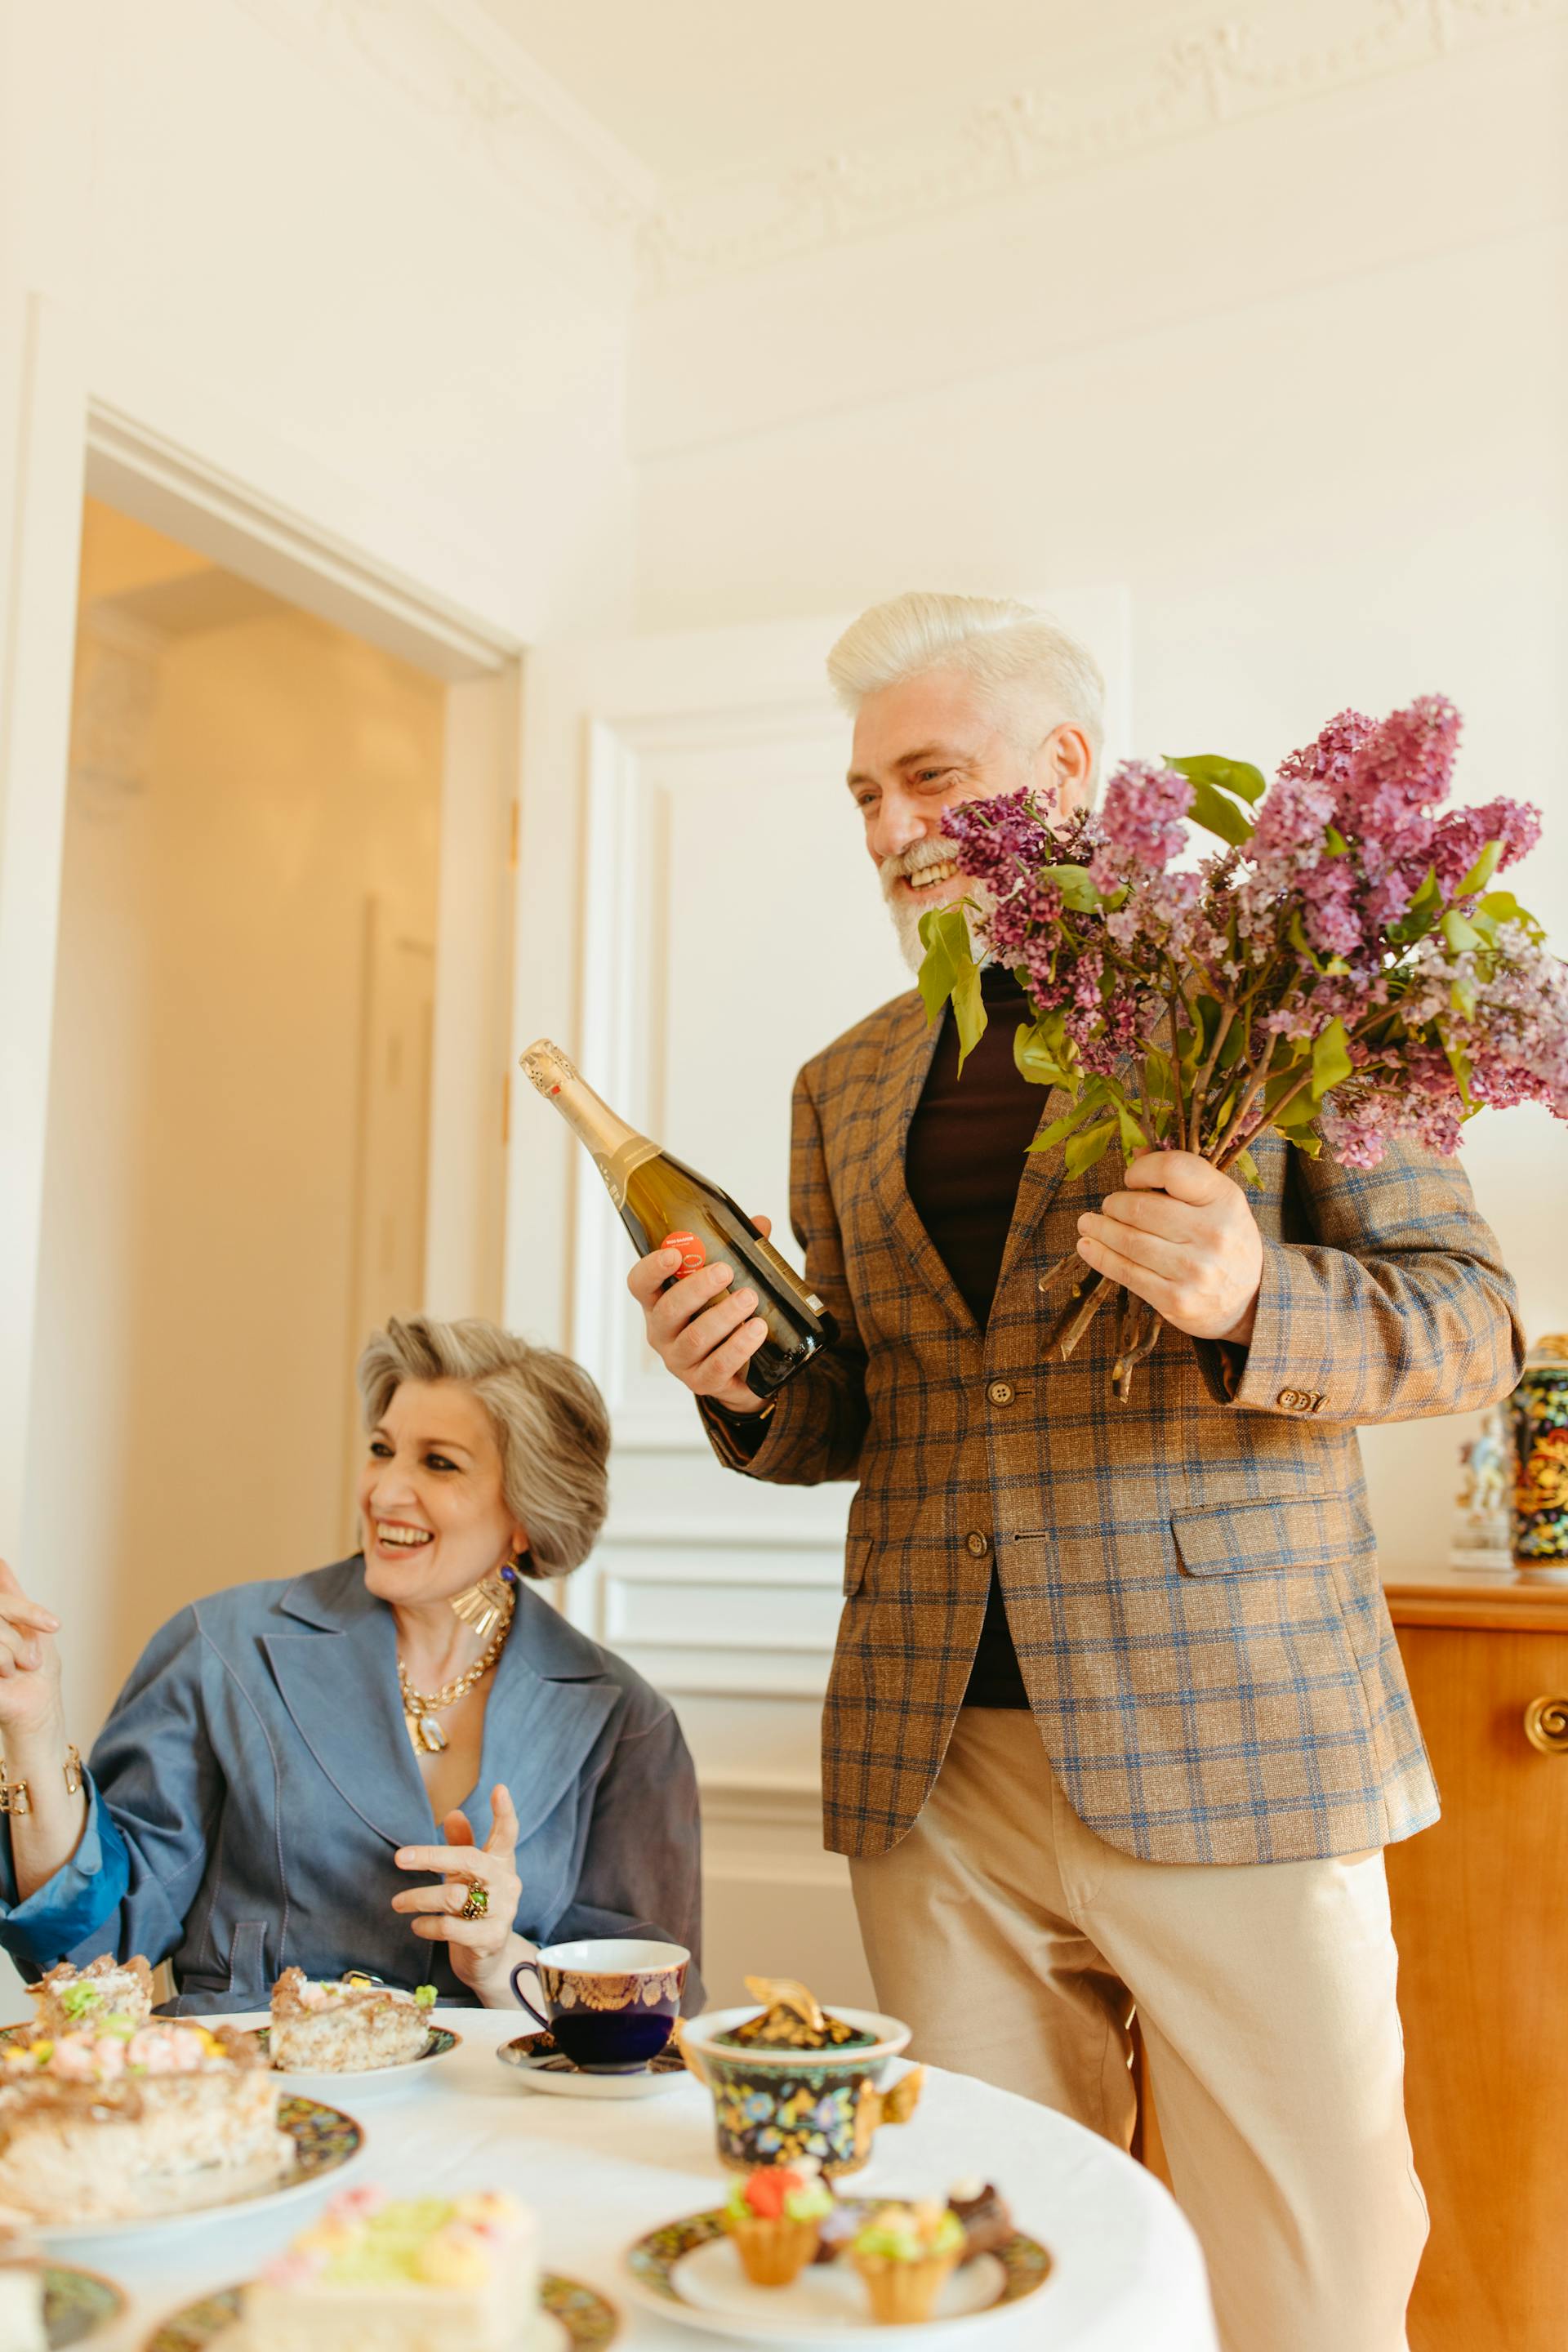 An elderly man celebrating over dinner with a bottle of champagne and flowers while his wife applauds | Source: Pexels